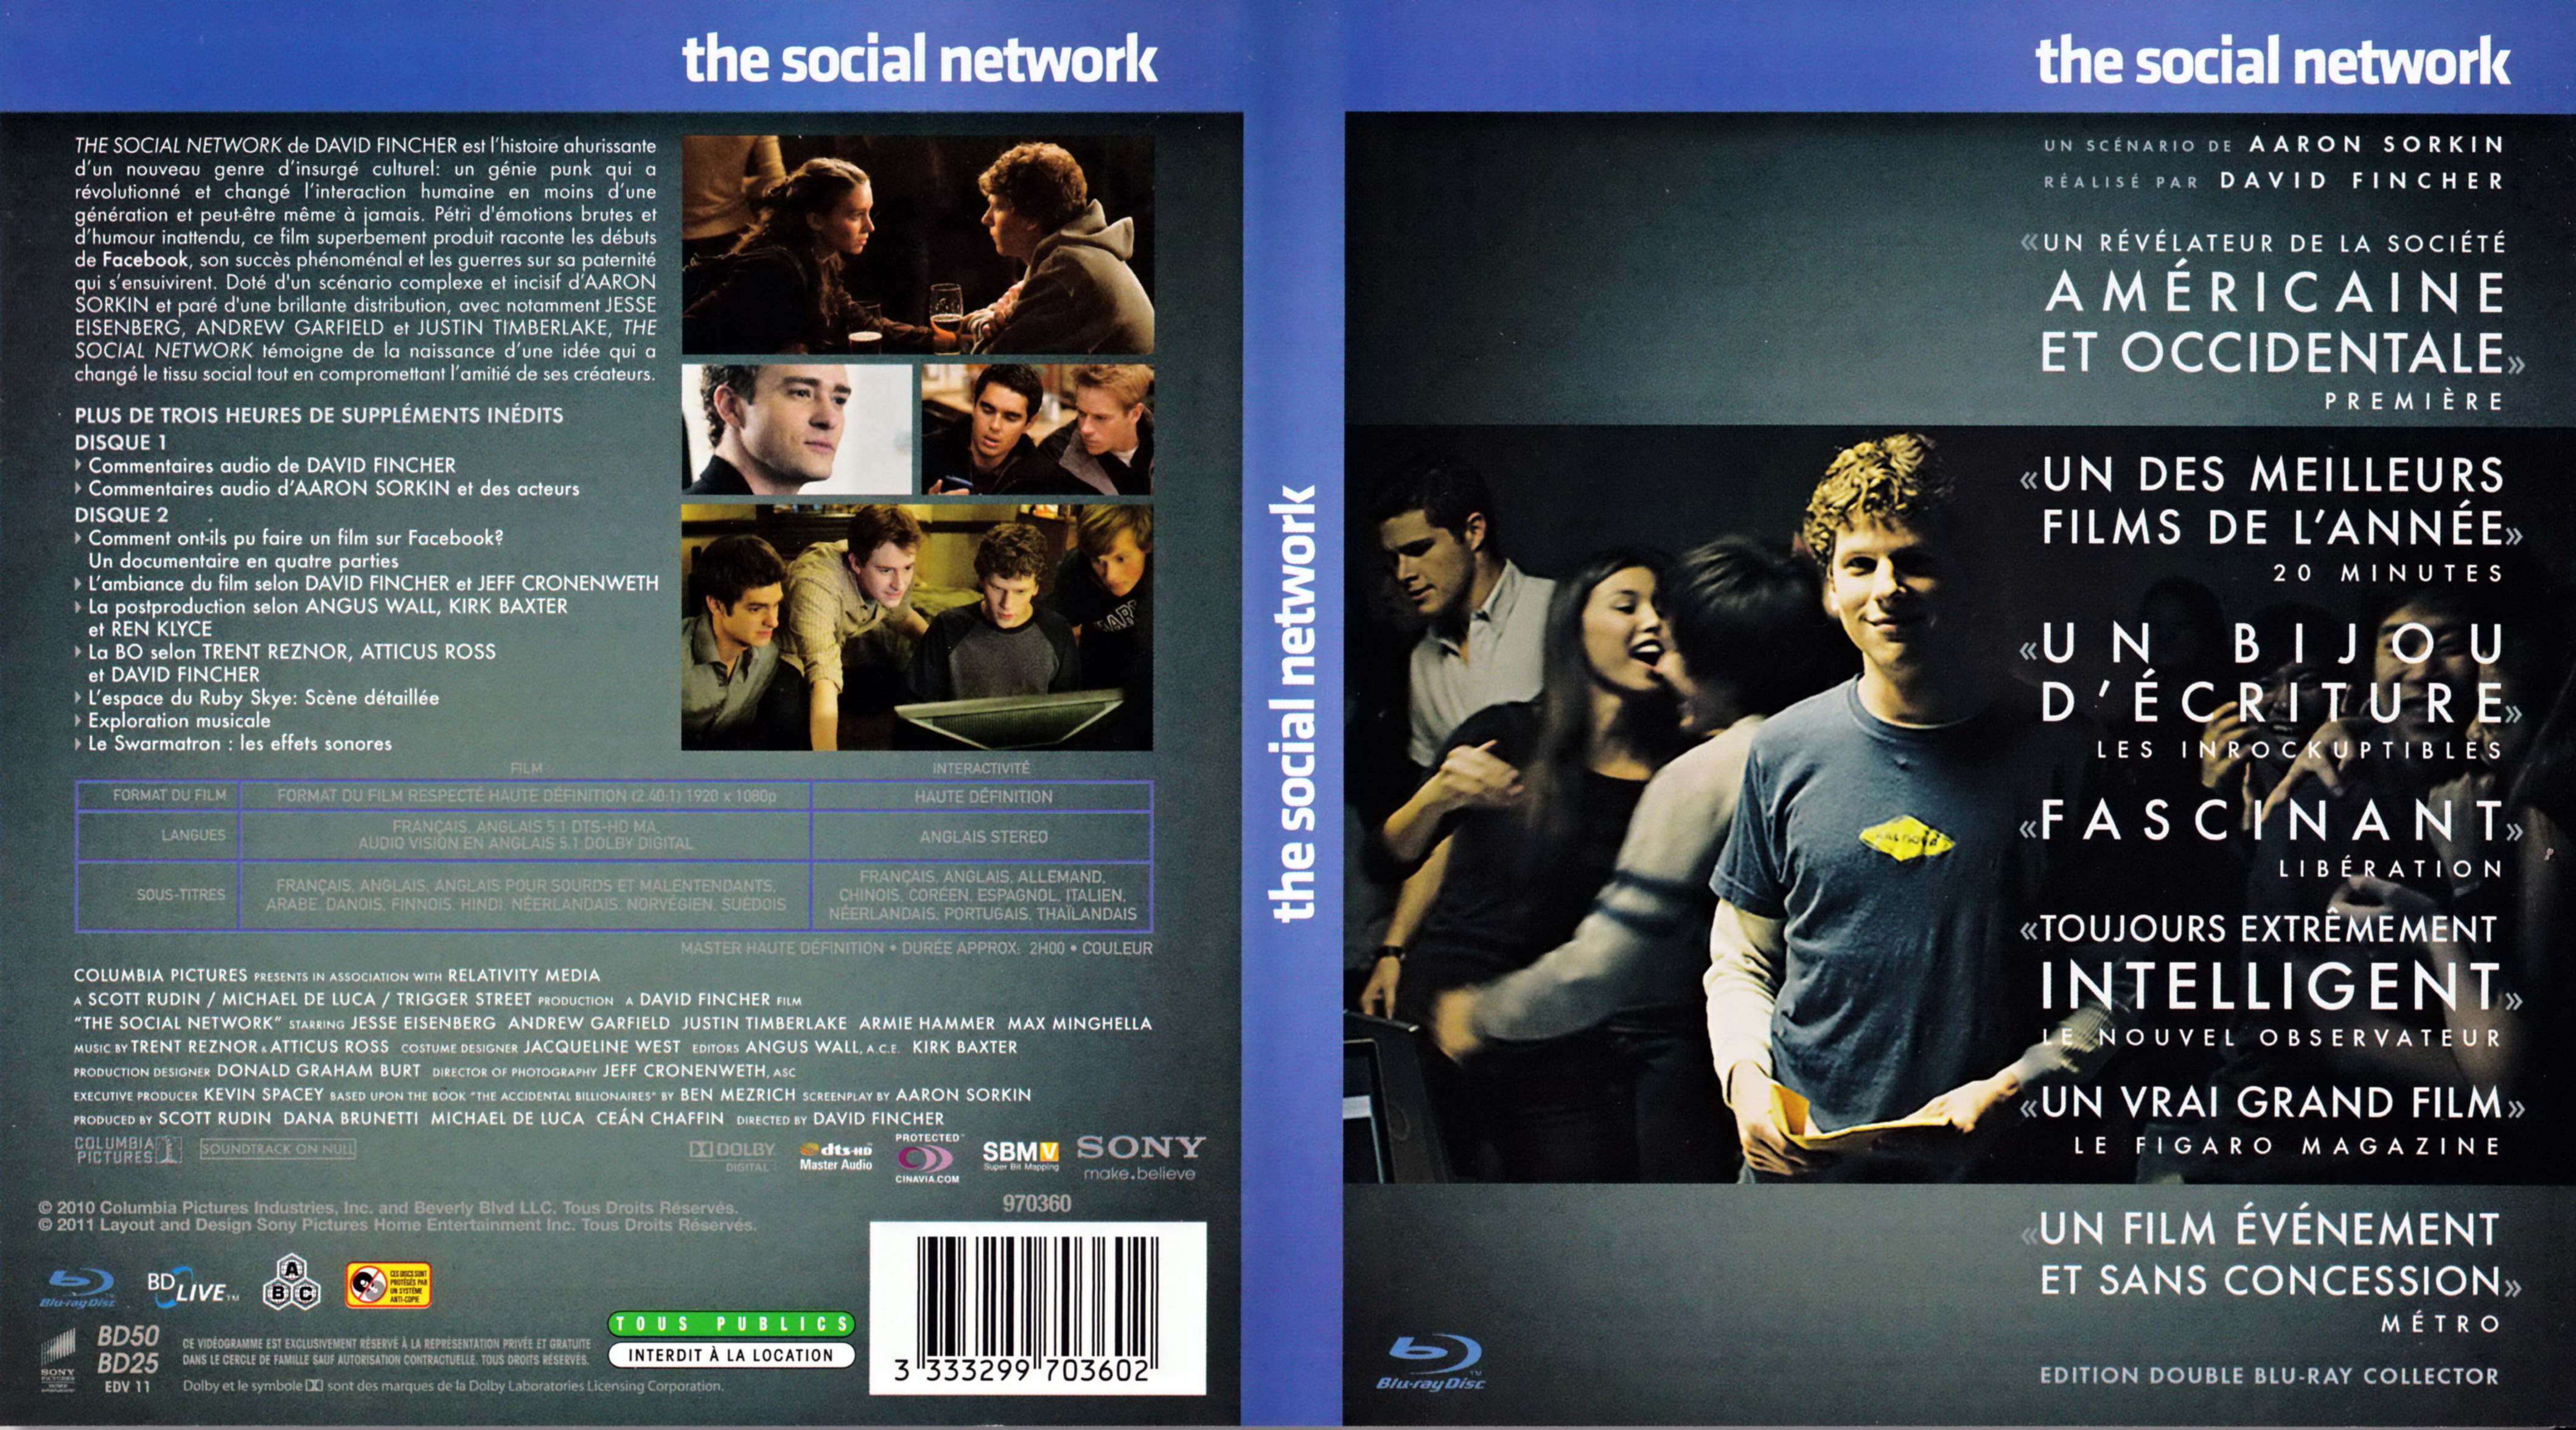 Jaquette DVD The social network (BLU-RAY)